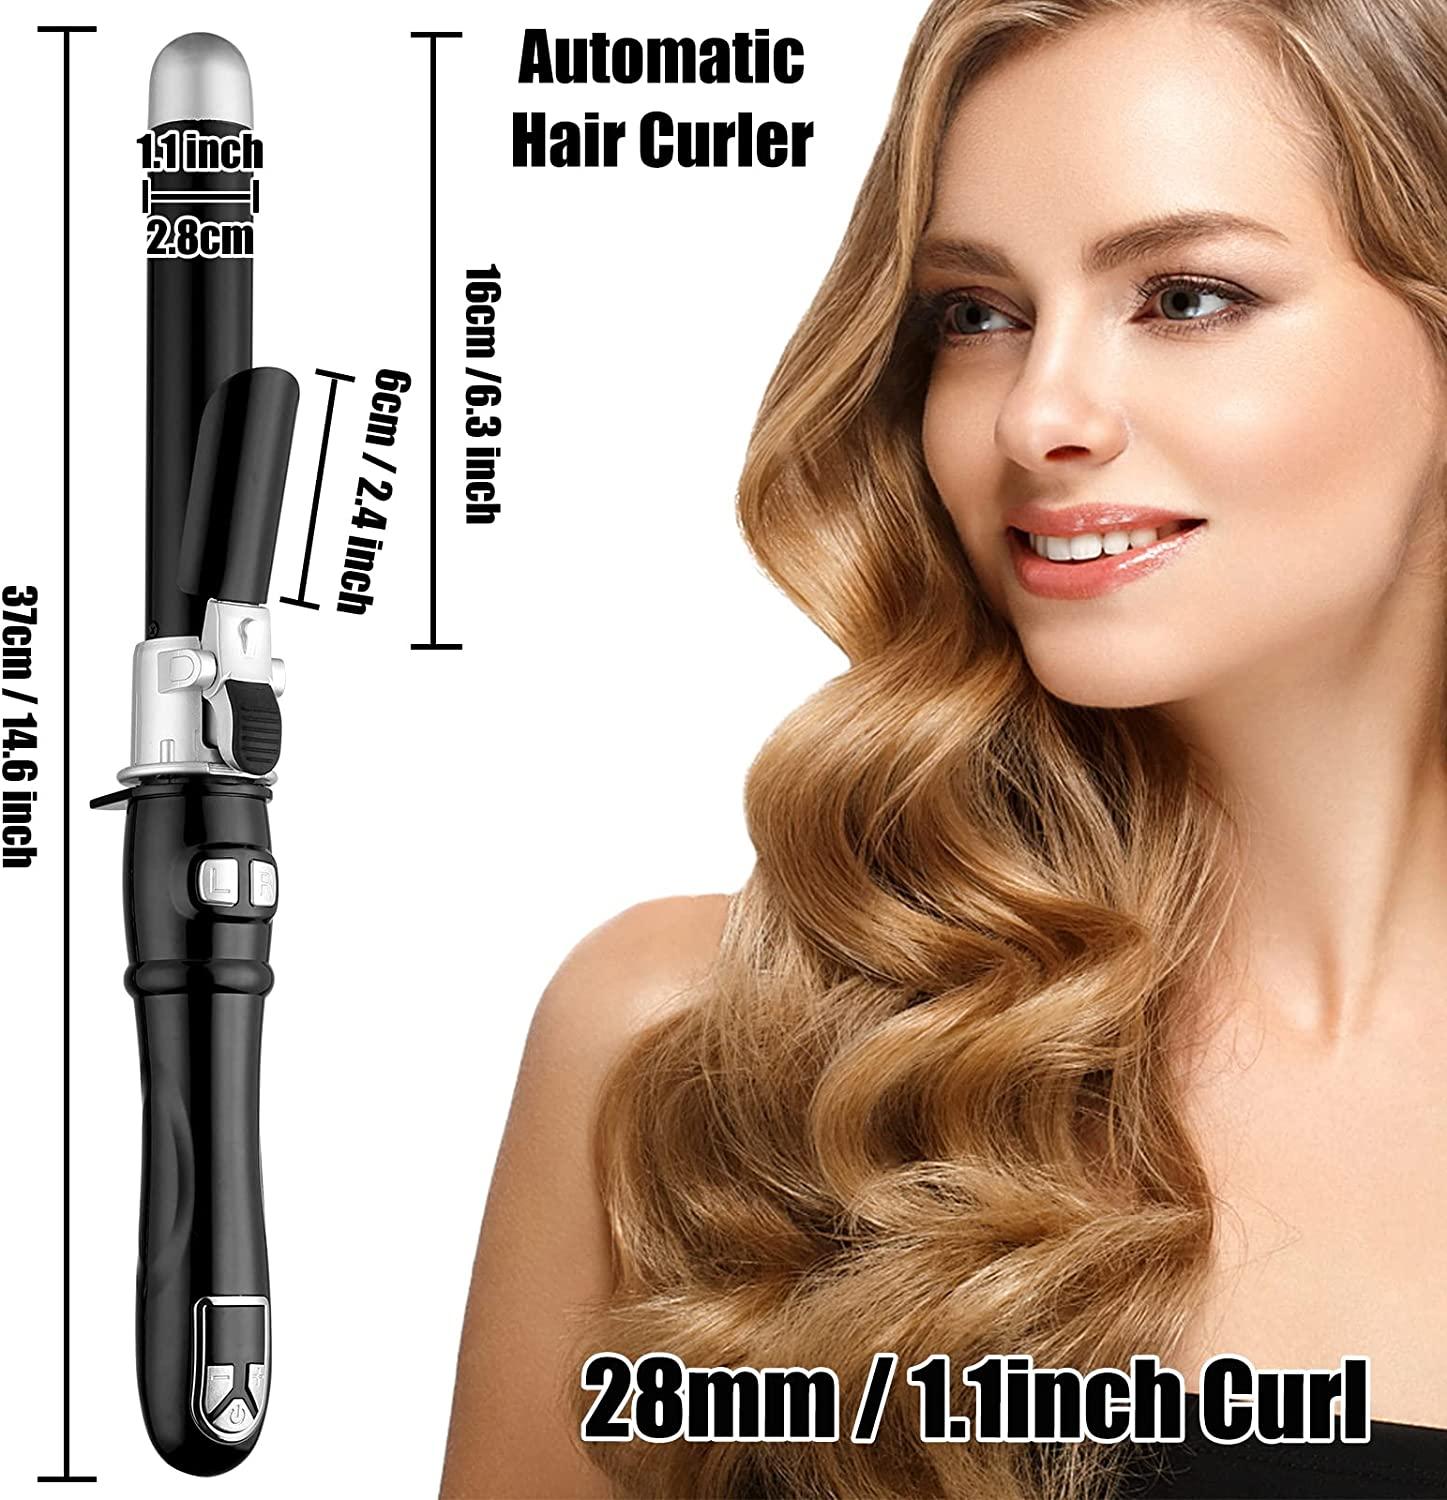 Hair Curling Wands Auto Curling Irons Automatic Hair Curler 28mm/32mm Curl  Hair Waving Irons Hair Styling Irons Hair Crimper Hair Waver 30s Instant  Heat Wand 110-220v (28mm/